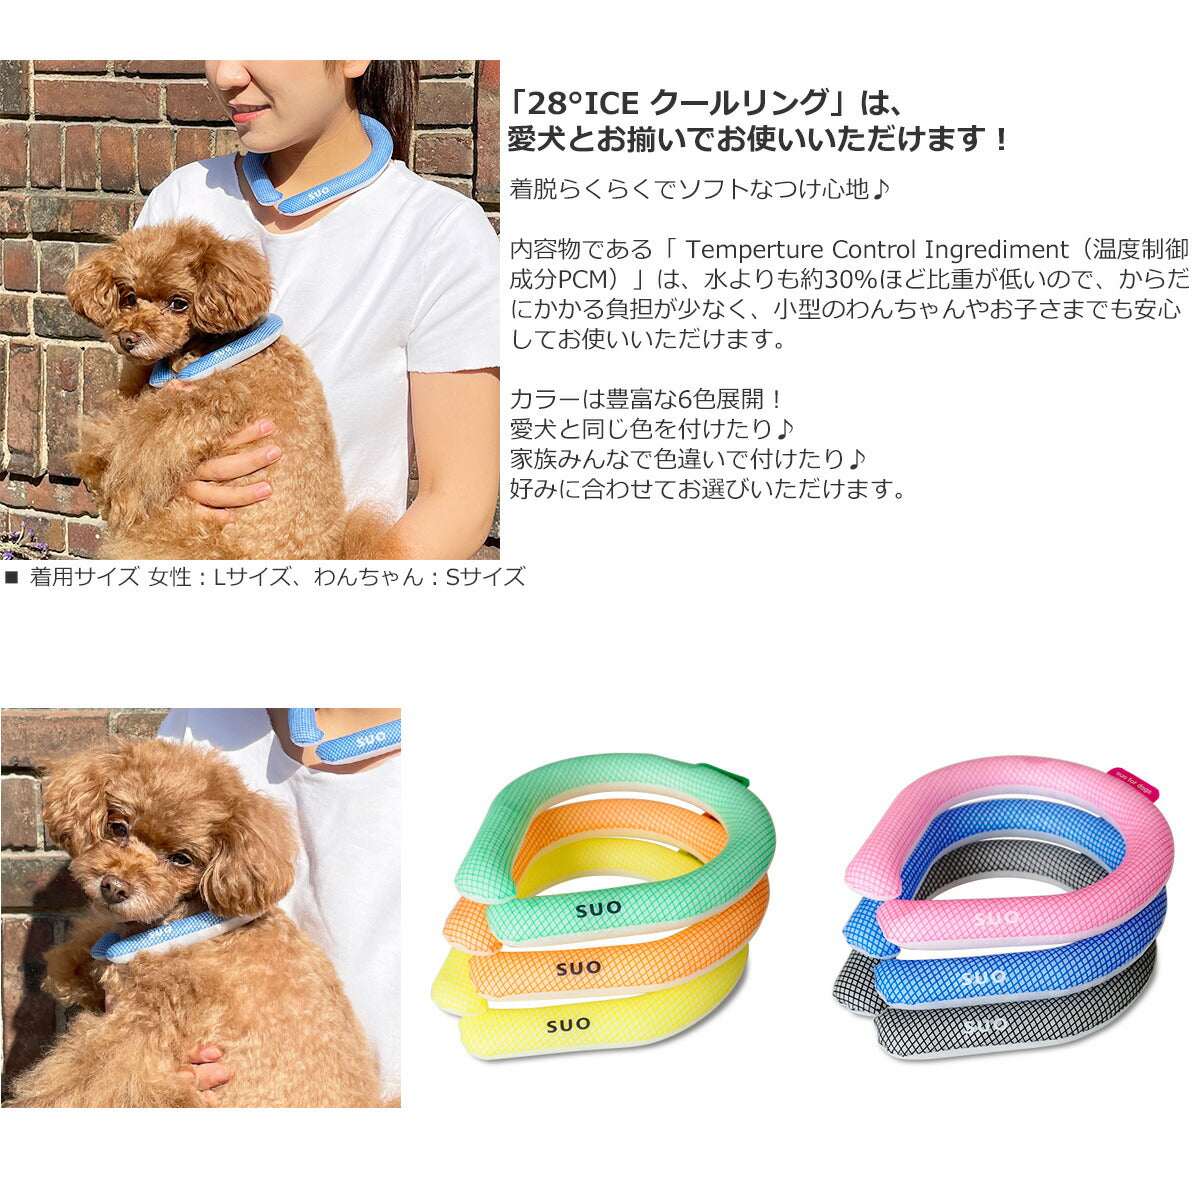 SUO for dogs 28°ICE SUOリング ボタンなし XS イエロー 熱中症対策グッズ 暑さ対策 ひんやり 首 冷感 犬 大人 子供